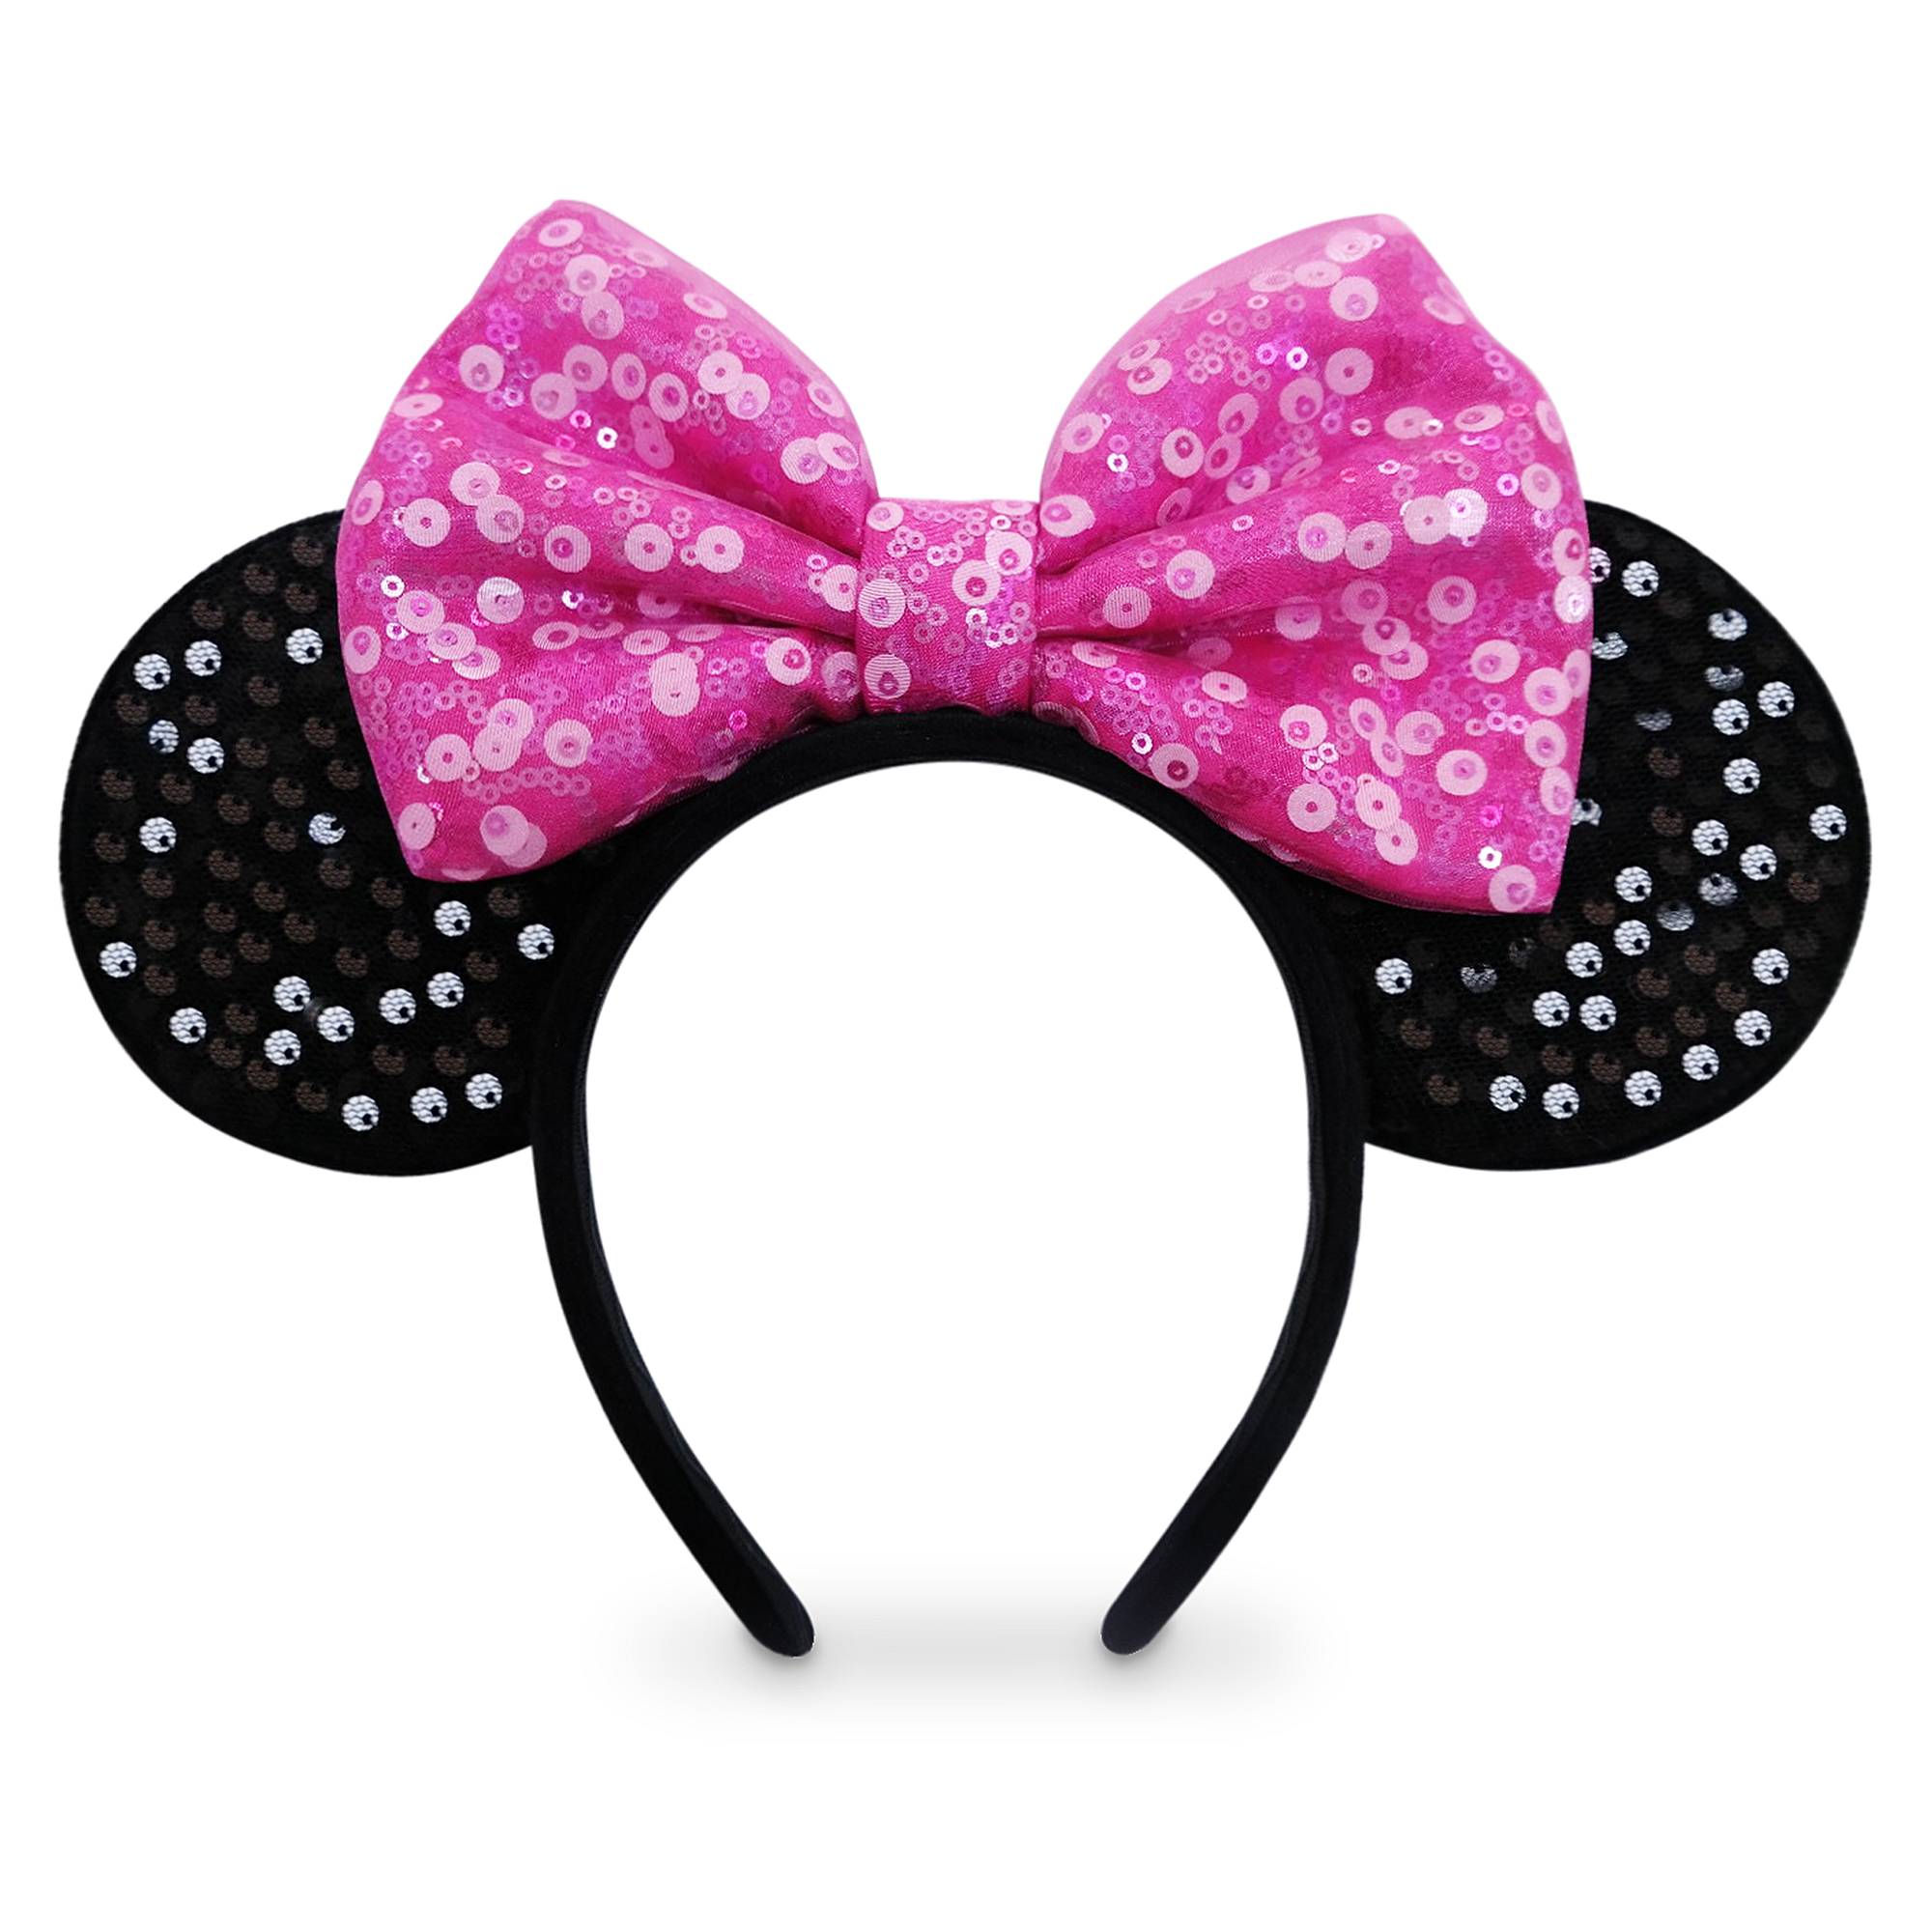 Minnie Mouse Ear Headband for Kids – Pink image